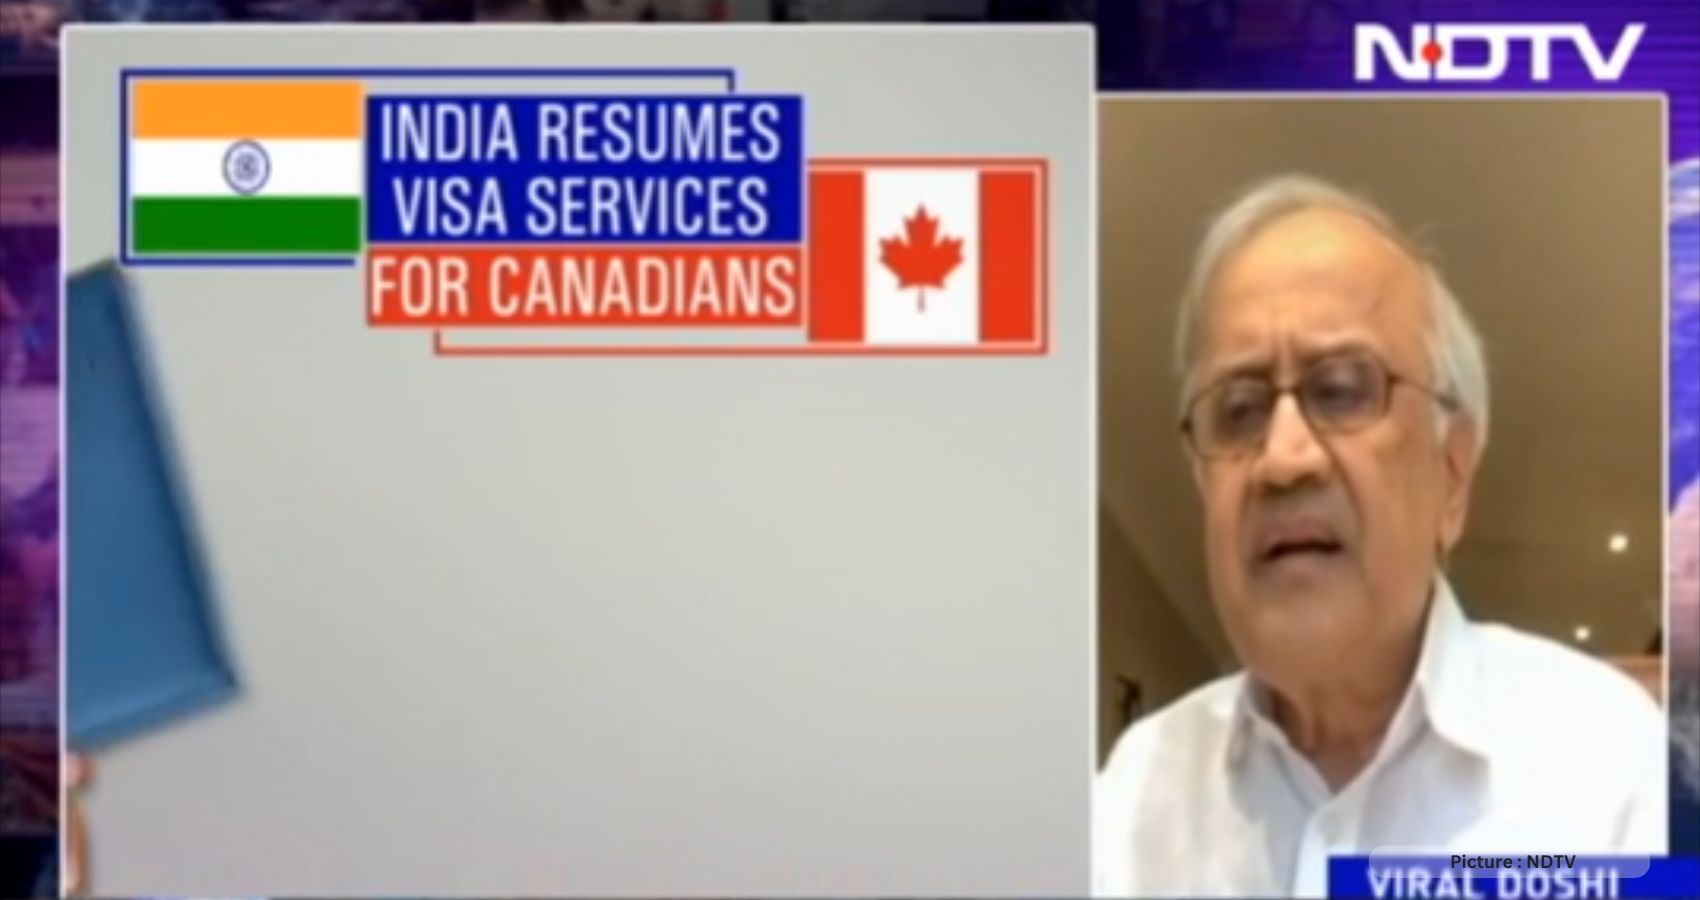 Despite Diplomatic Tensions, Canada Remains a Preferred Choice for Indian Students, Says Expert